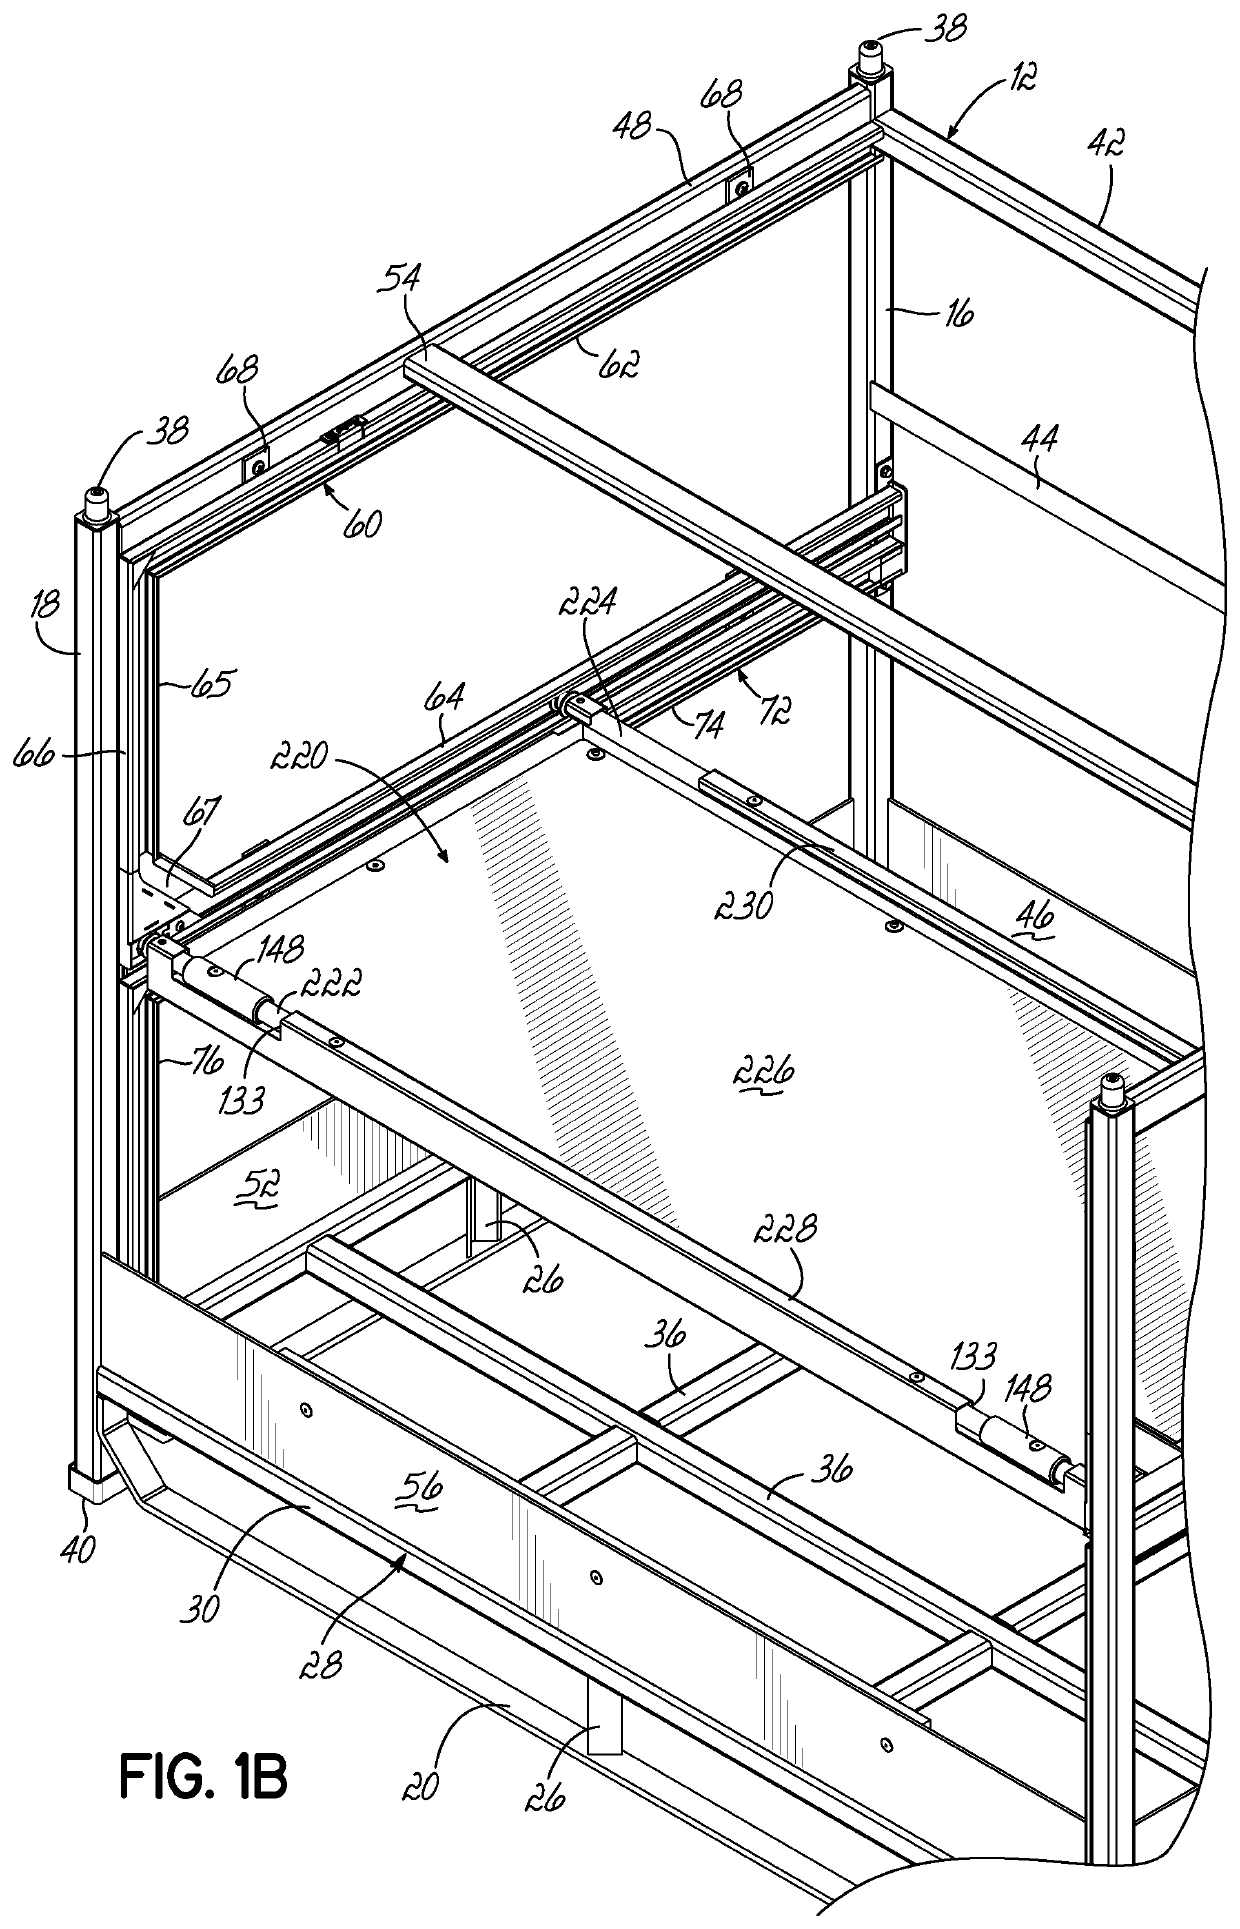 Container having multiple layers of dunnage, at least one layer having at least one lockable crossbar assembly